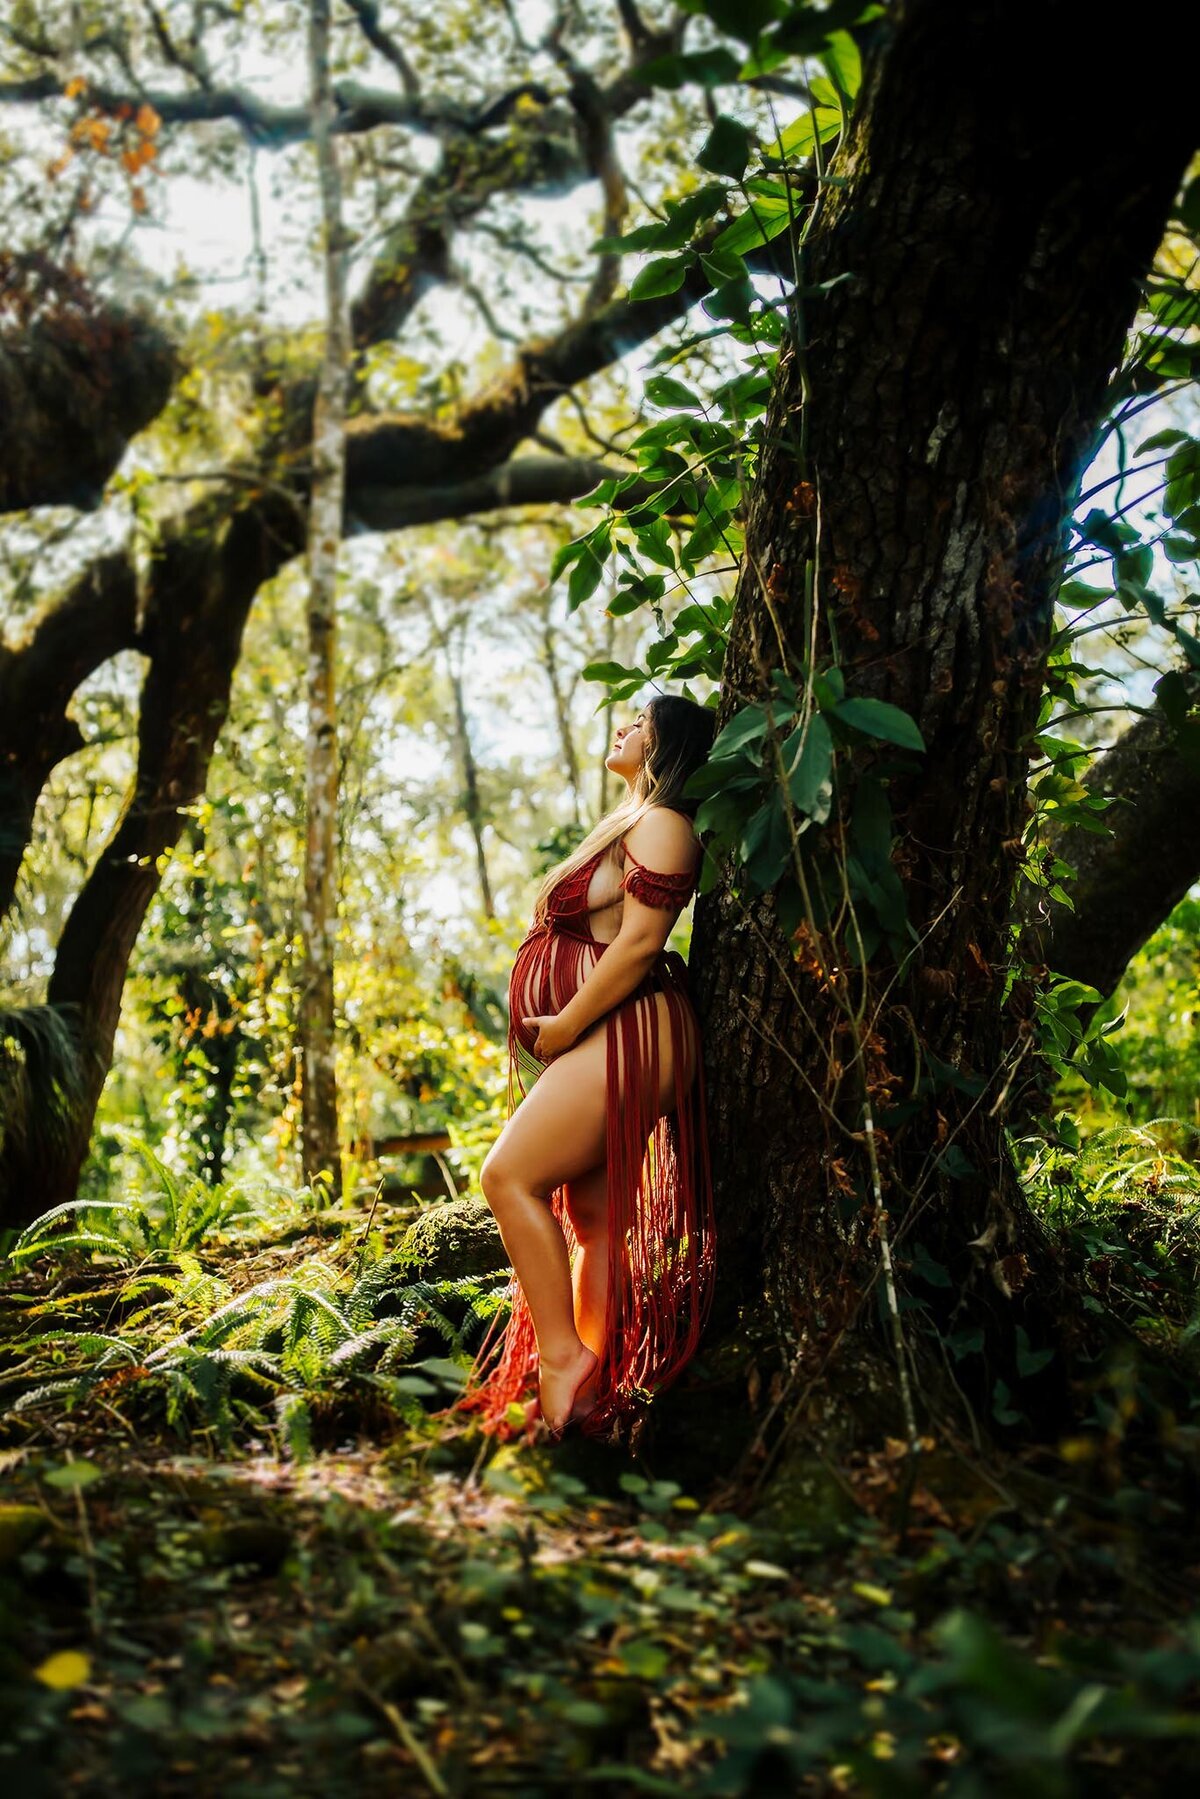 stunning pregnancy portraits of a women in a macrome dress surrounded by lush greenery at mocassin lake park fl